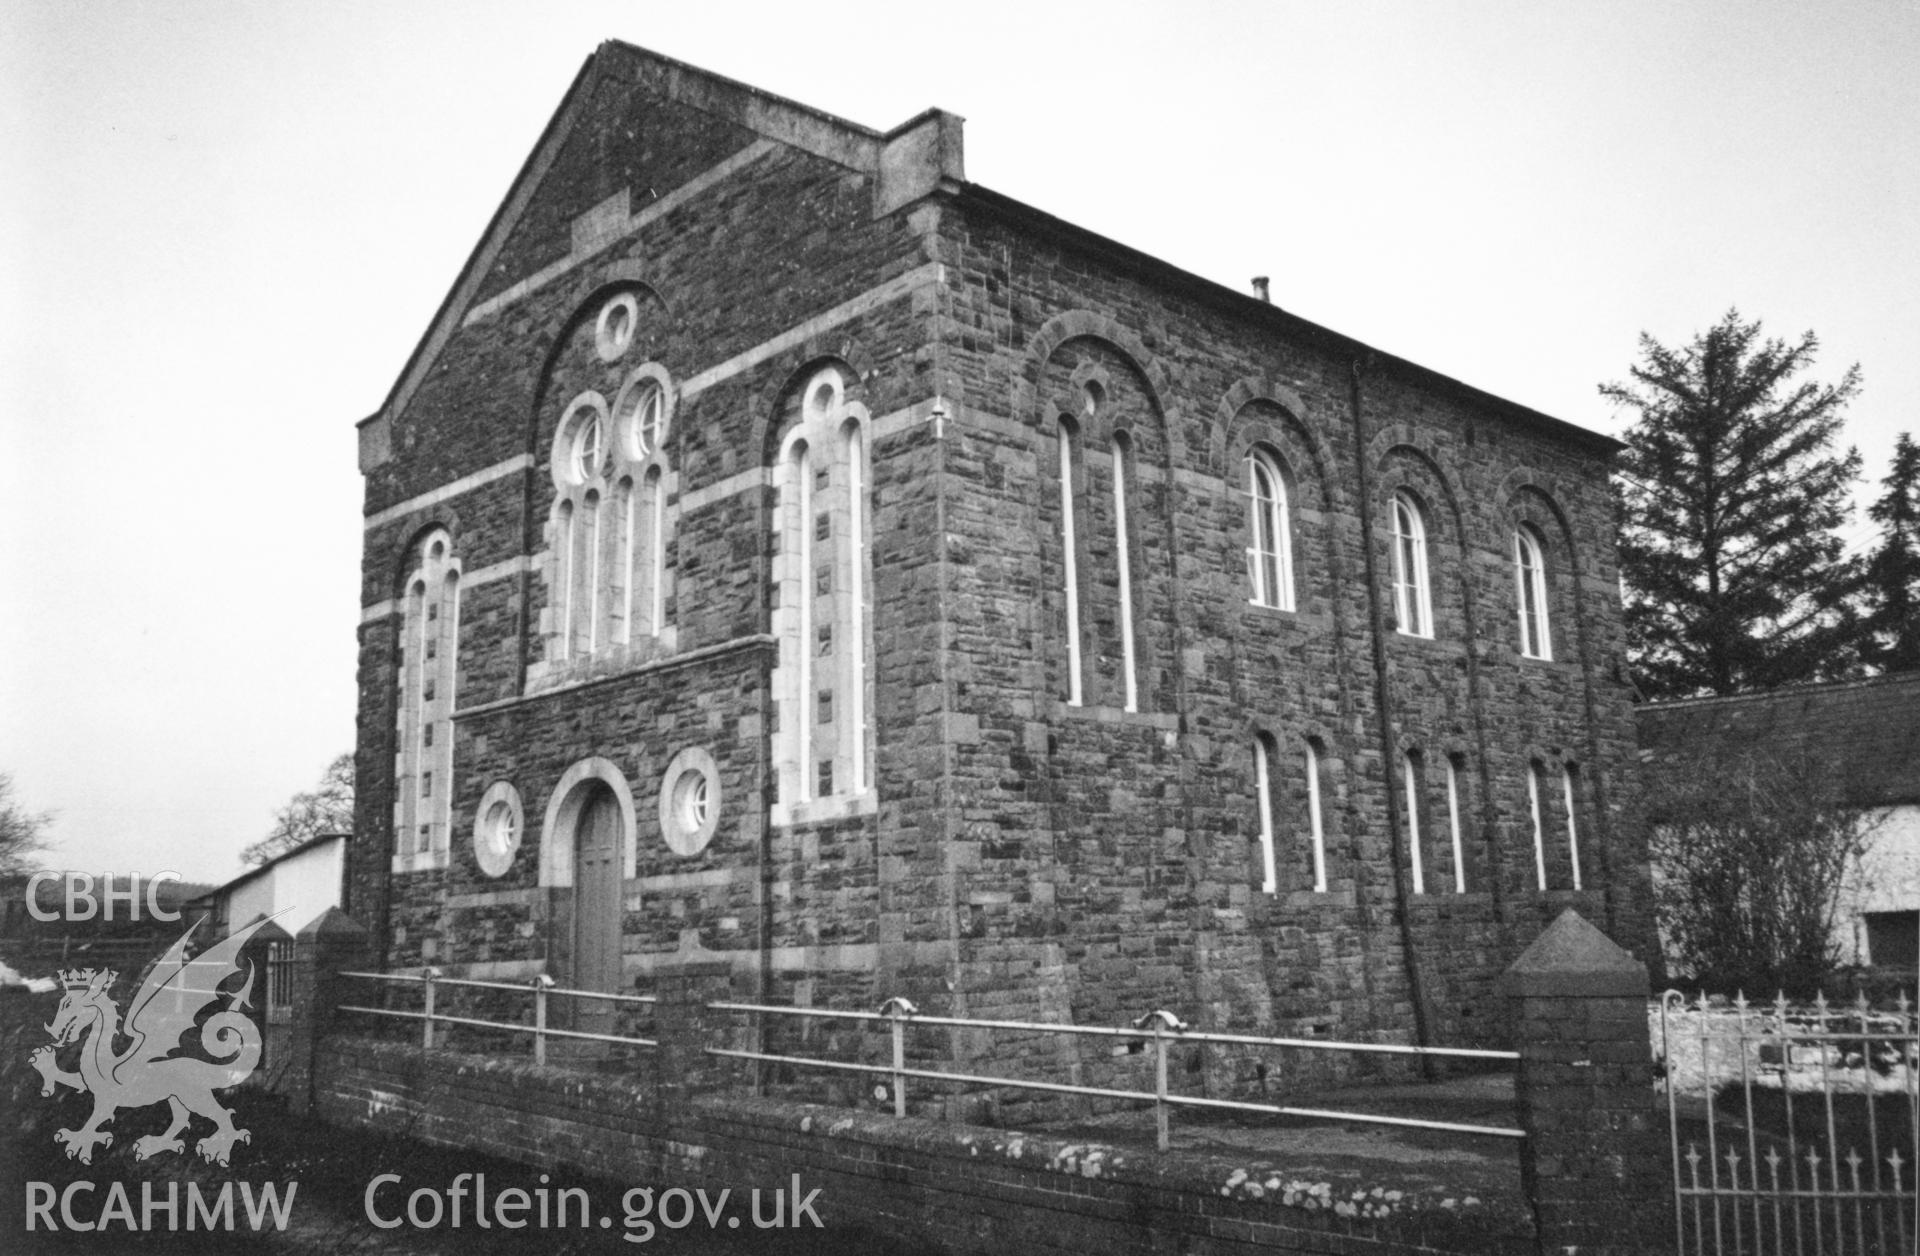 Digital copy of a black and white photograph showing an exterior view of Ebeneser Welsh Independent Chapel, Llansadwrn, taken by Robert Scourfield, 1996.